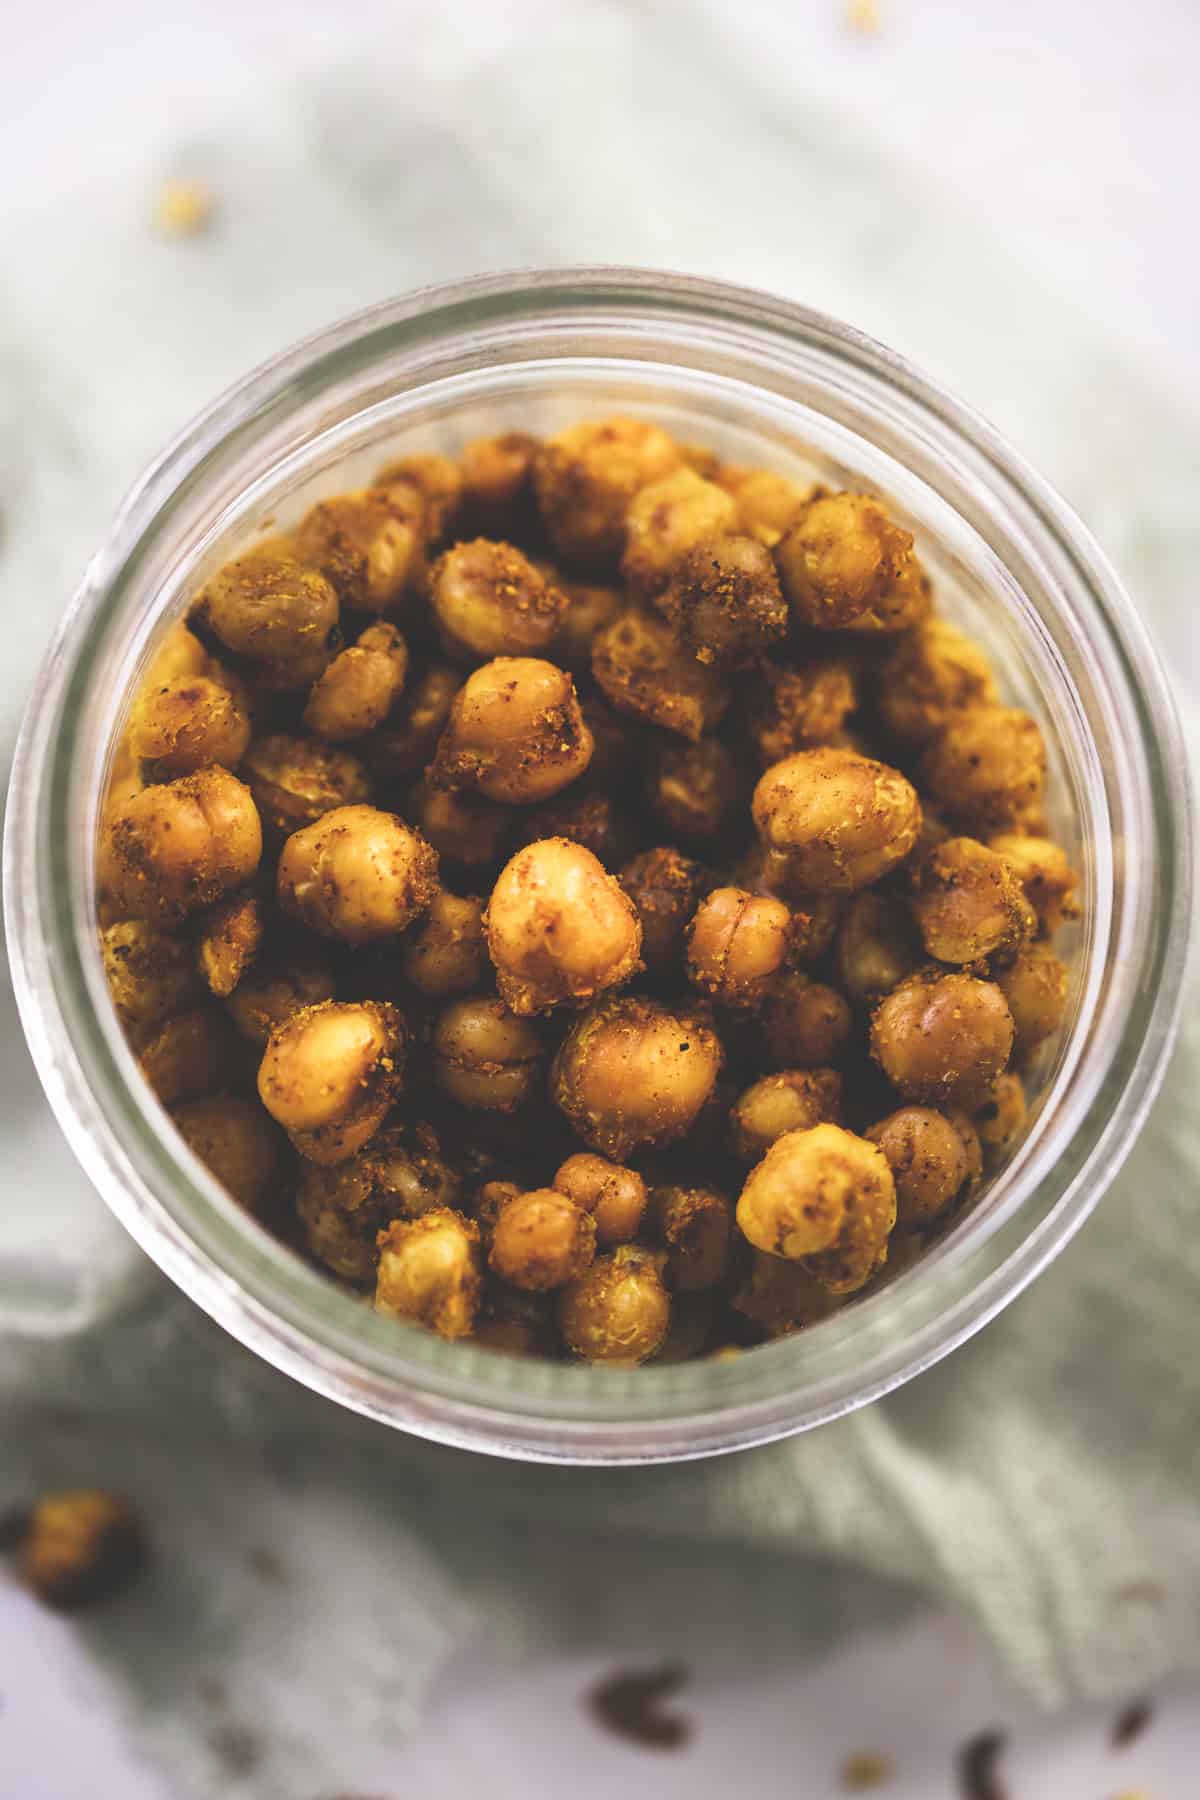 Roasted and seasoned chickpeas in a glass jar resting on a sage cheesecloth with split chickpeas and chili flakes surrounding.